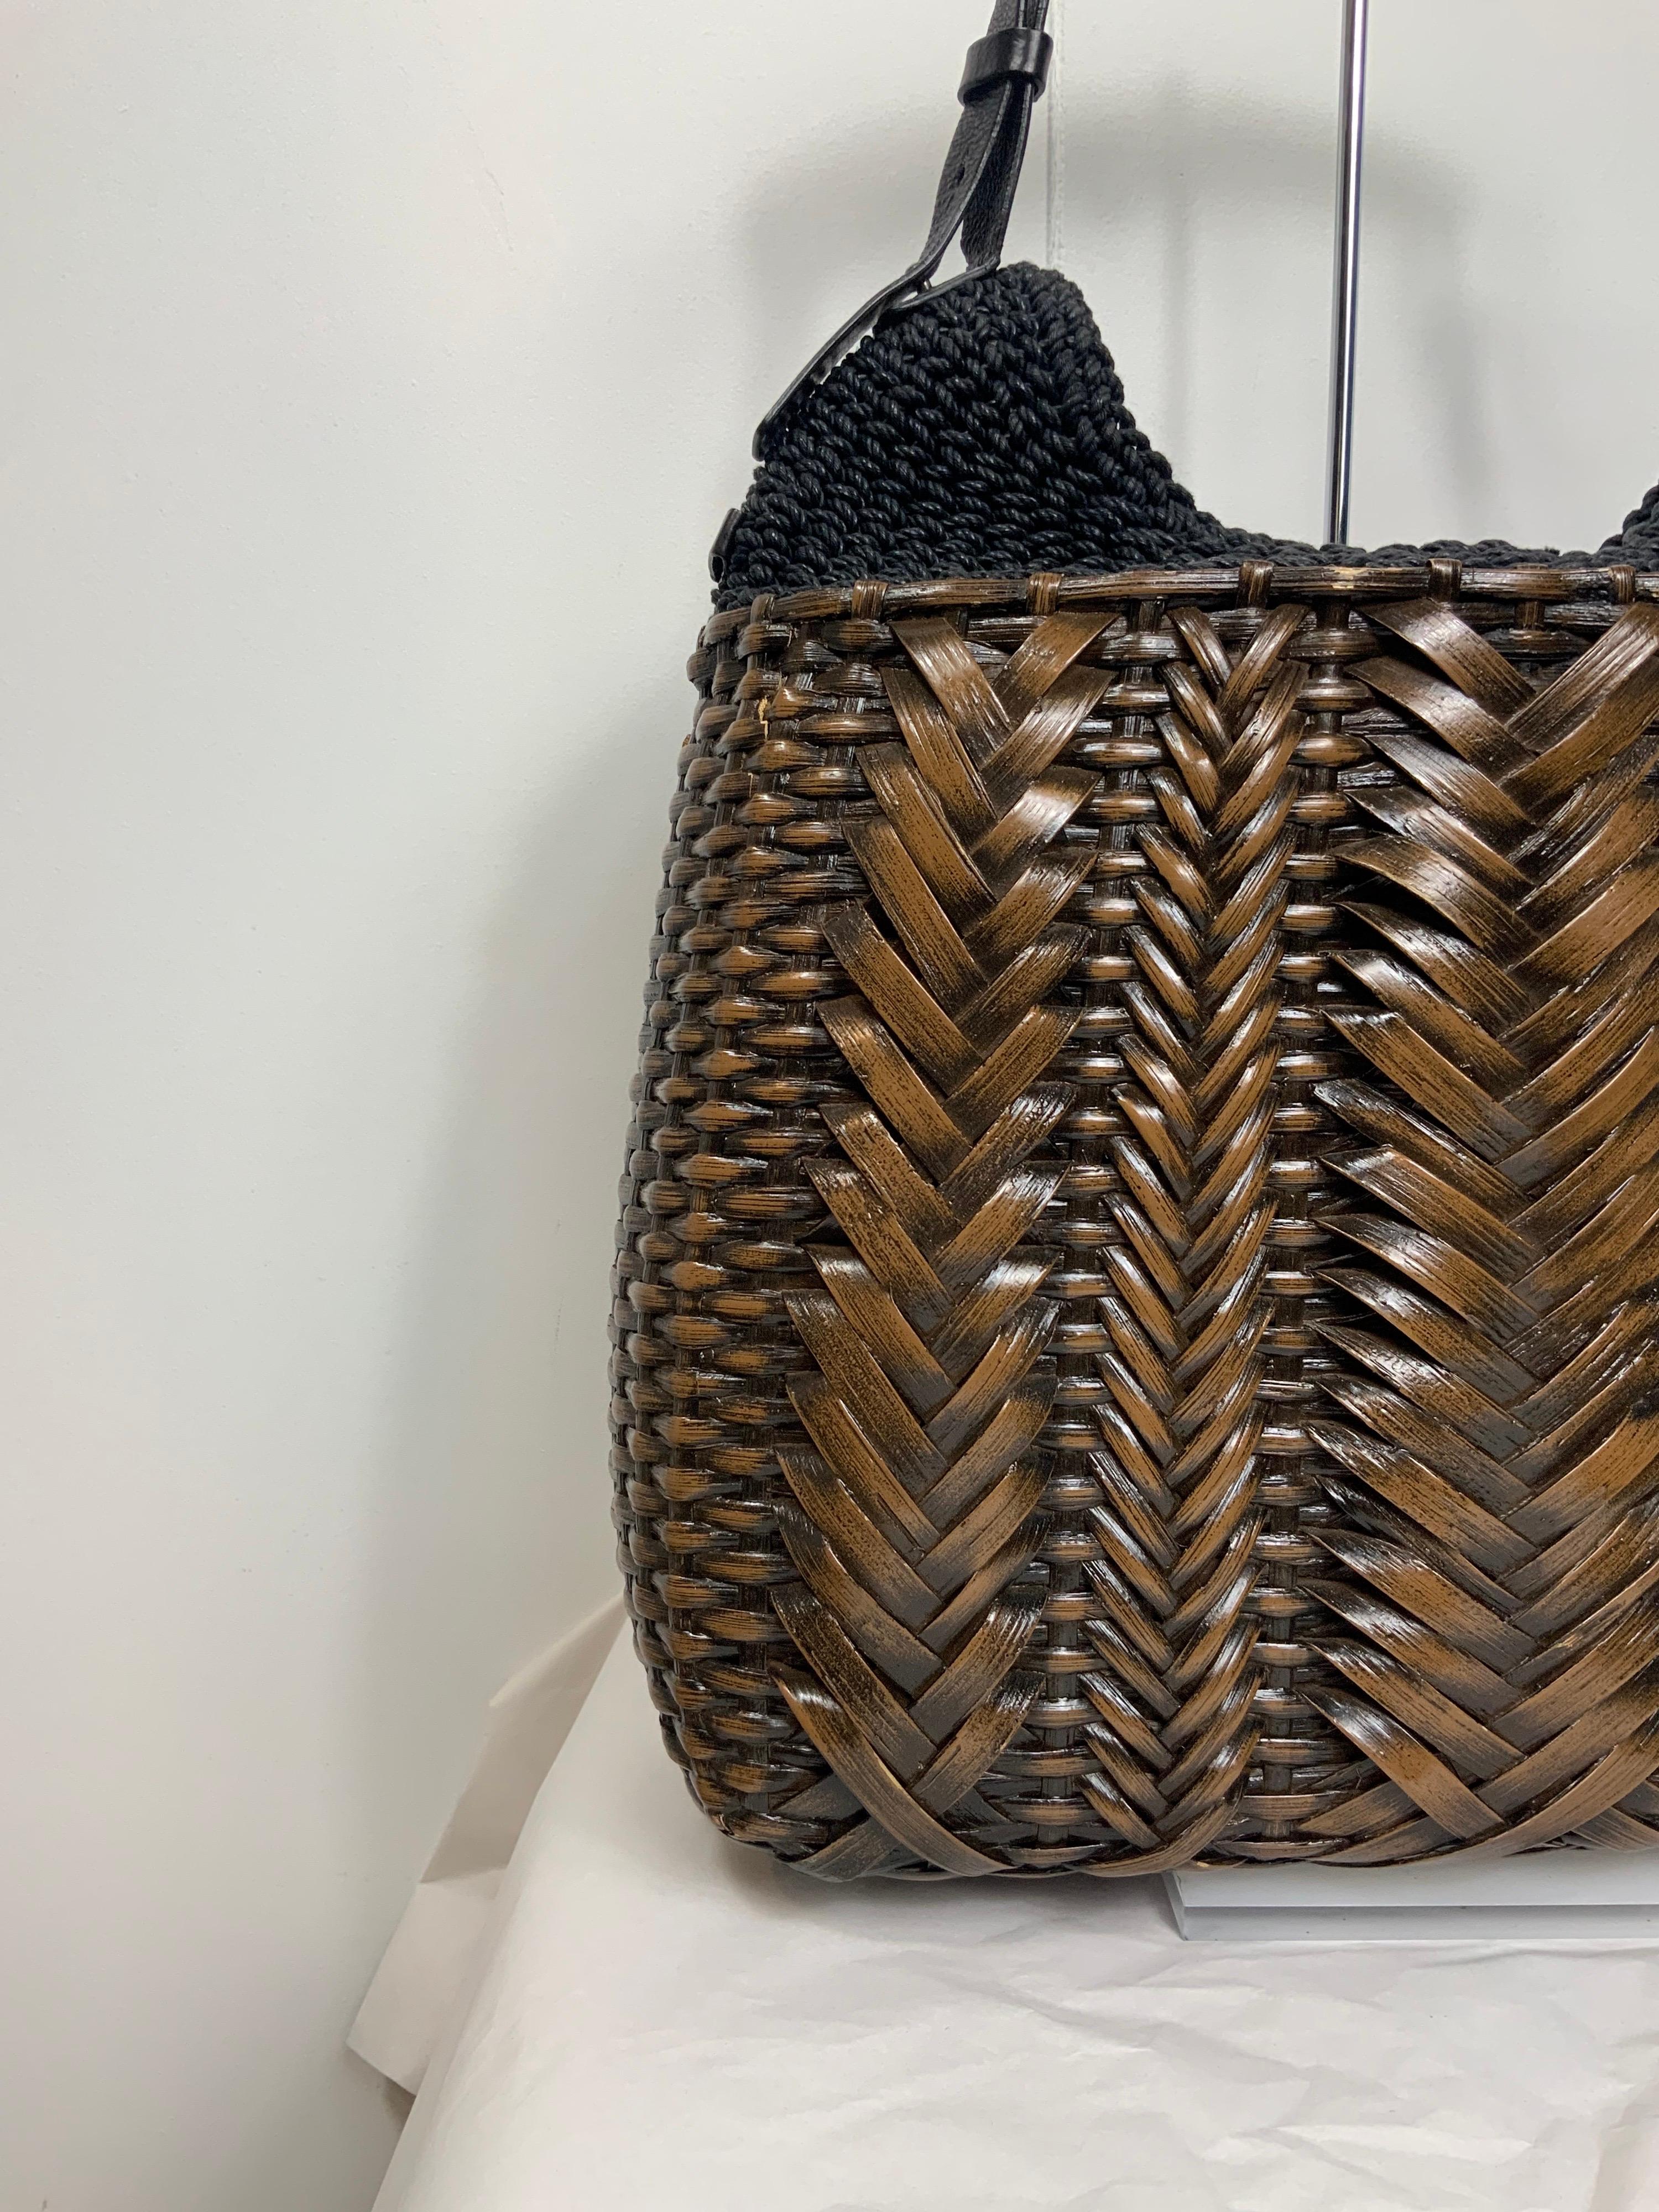 Yves Saint Laurent Mombasa shoulder bag.
Iconic piece. One of a kind.
In black wicker with worn handle featuring silver-tone hardware. Black leather details.
Opens with a magnetic button and is fully lined with one zipper pocket against the back.